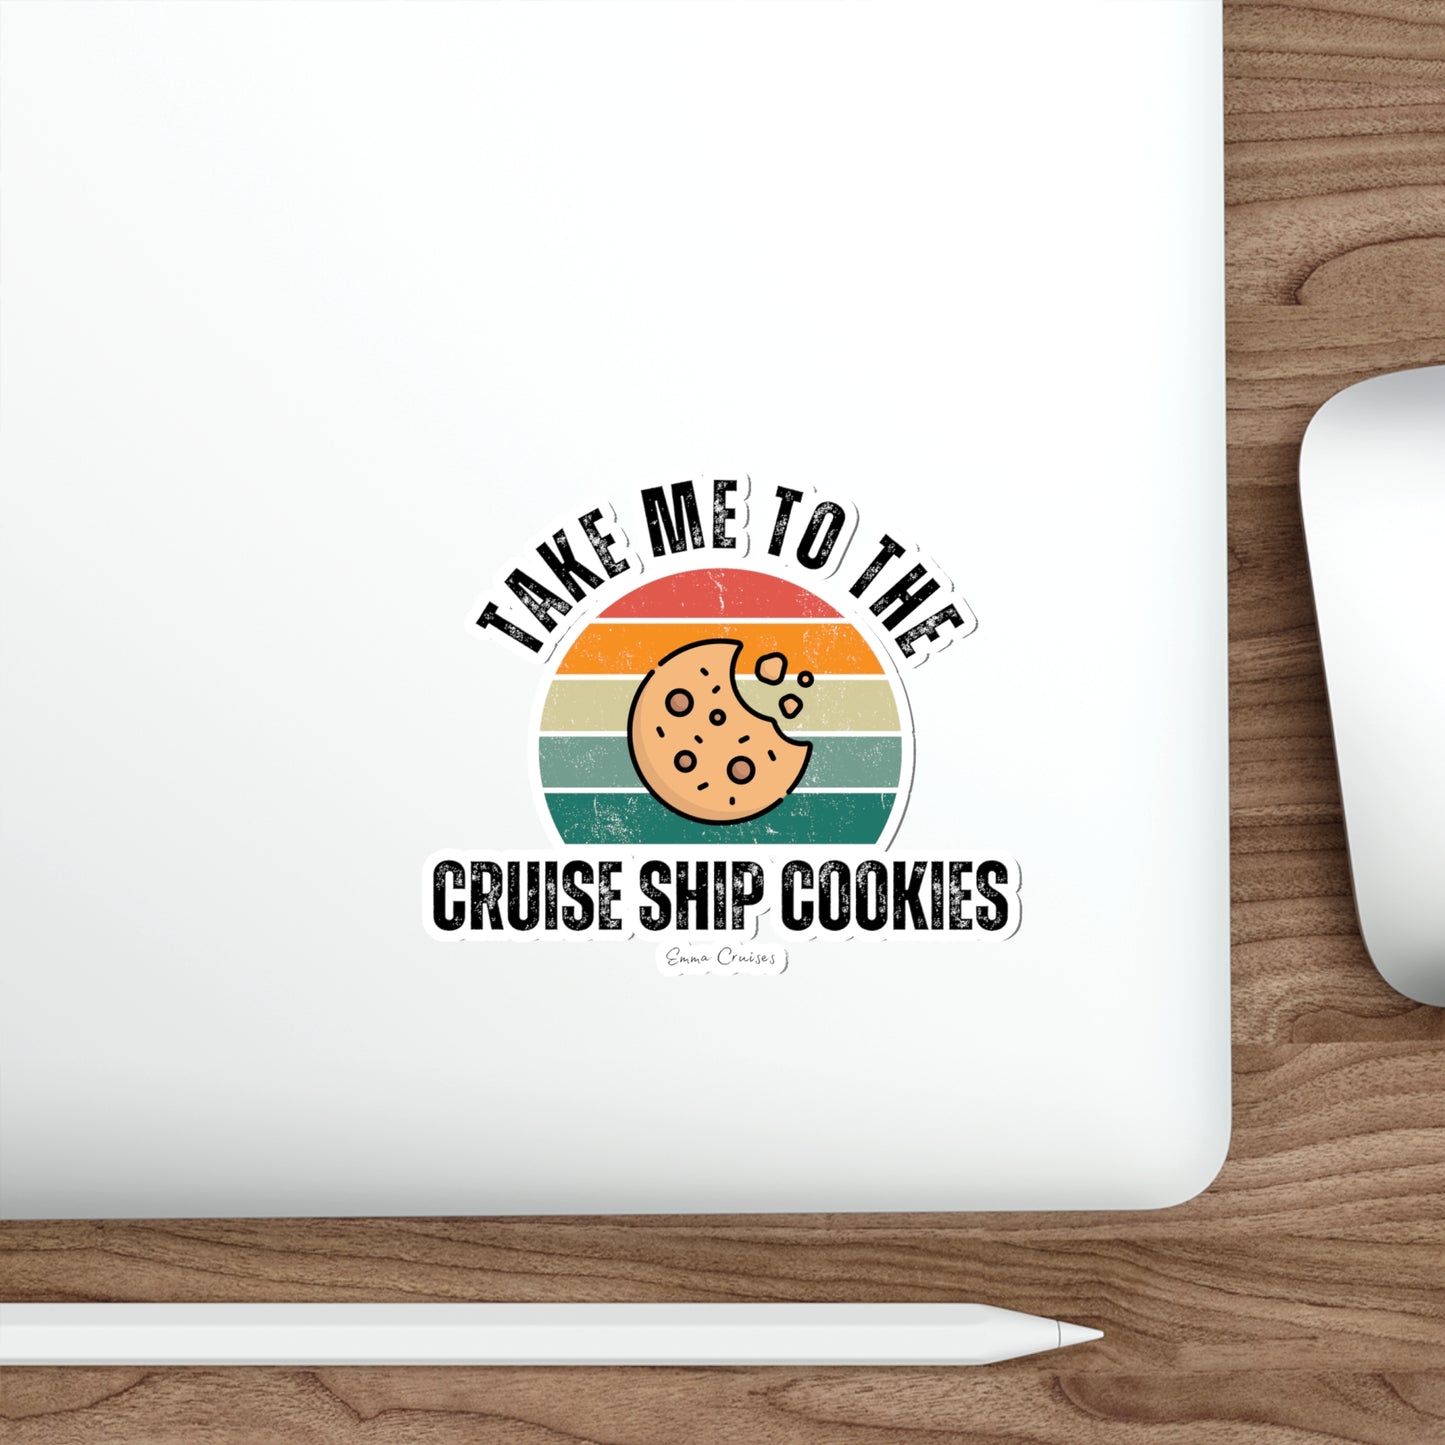 Take Me to the Cruise Ship Cookies - Die-Cut Sticker